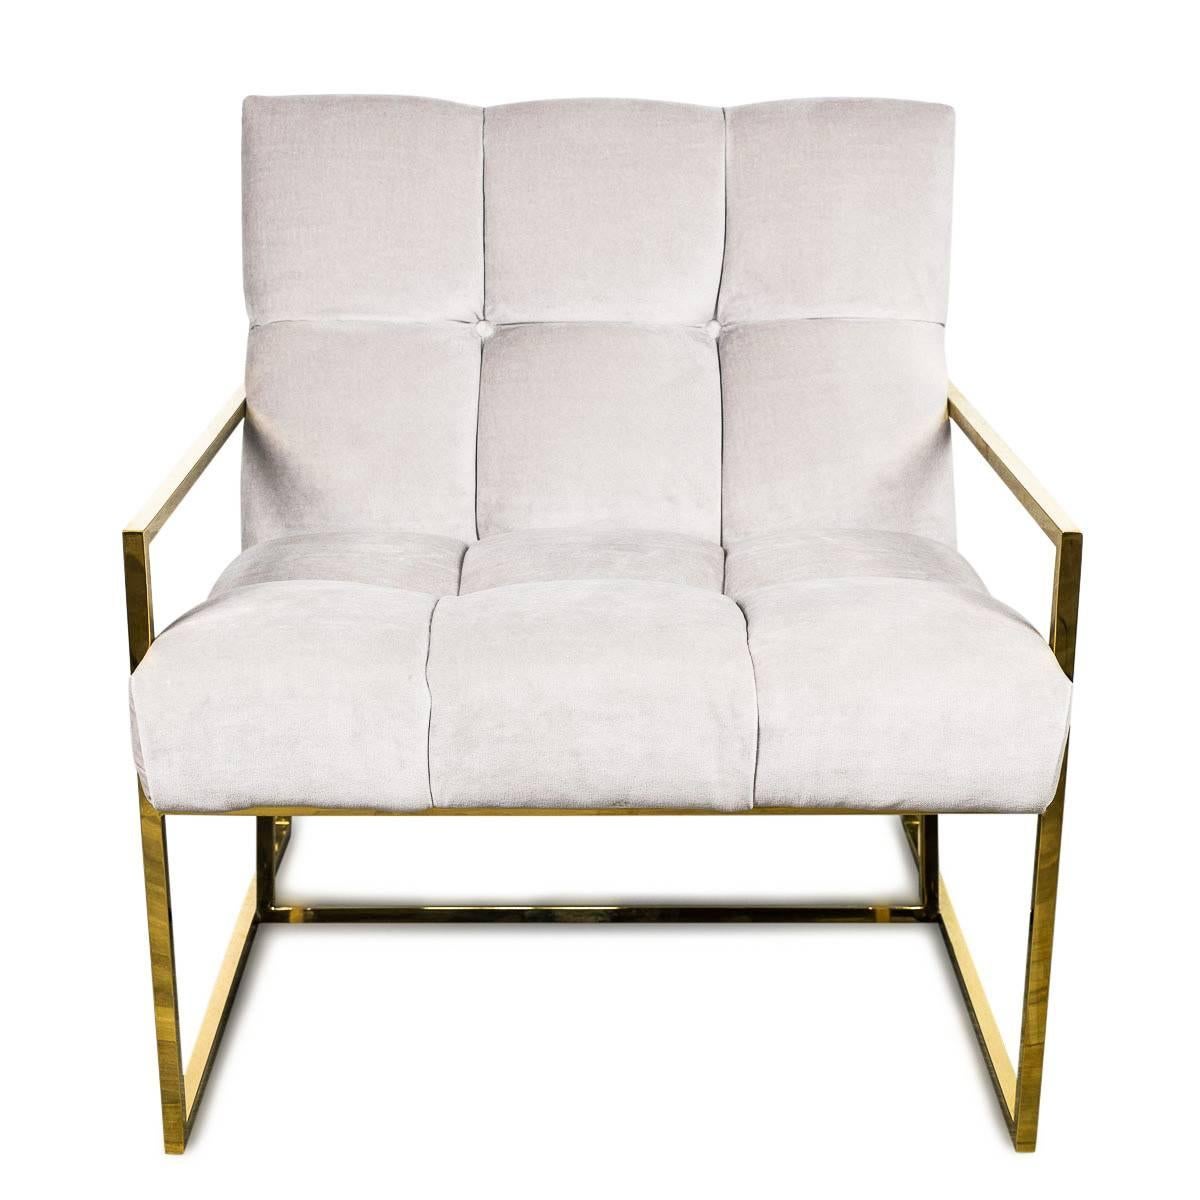 A slick brass frame, a slight pitched back and tufted velvet is perfect on it's own, or pair it up. Shown in cream velvet. 

Dimensions:

31